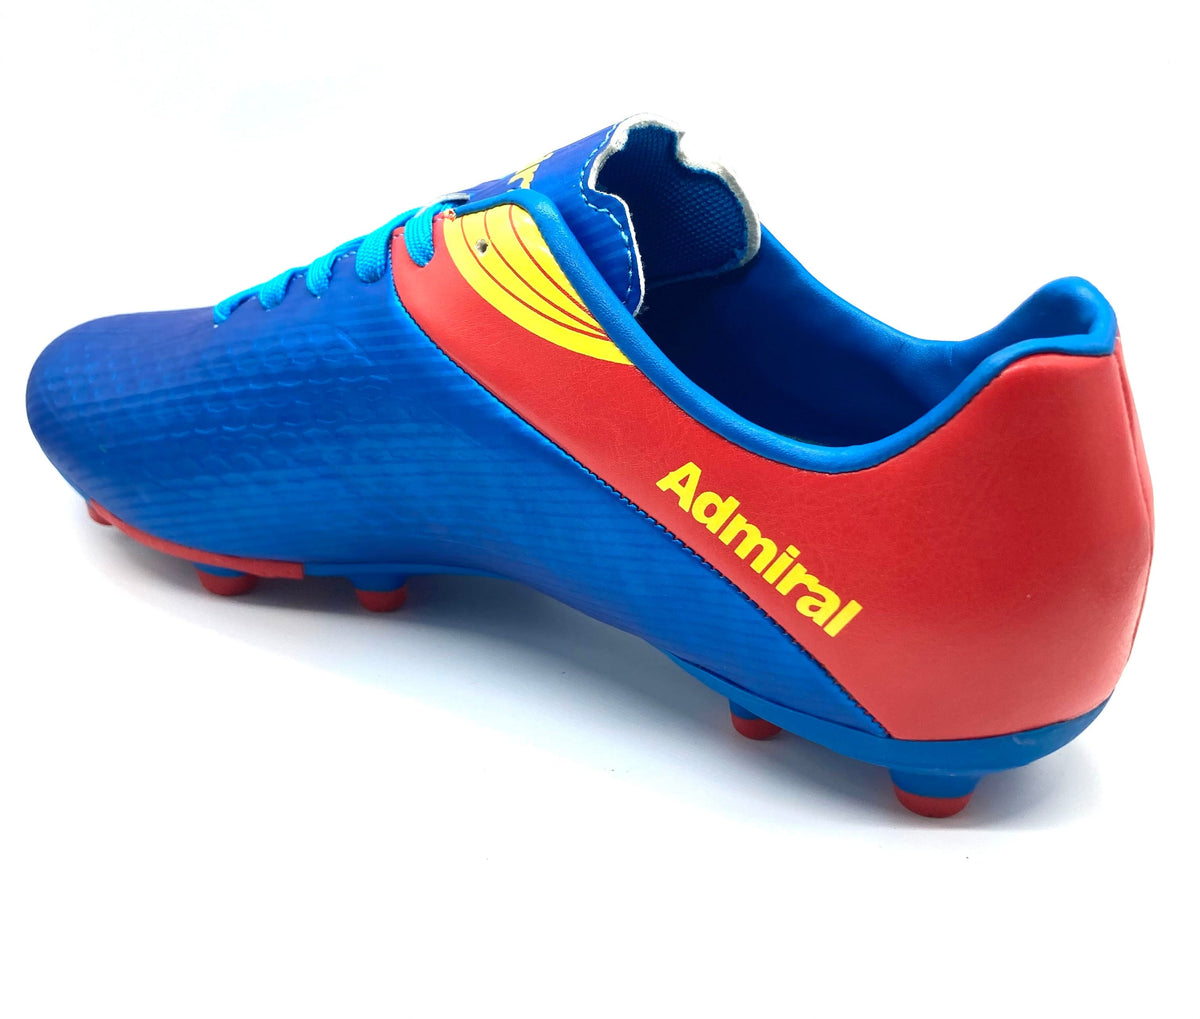 ADMIRAL Football Boots - Pulz Demize - Royal Electric